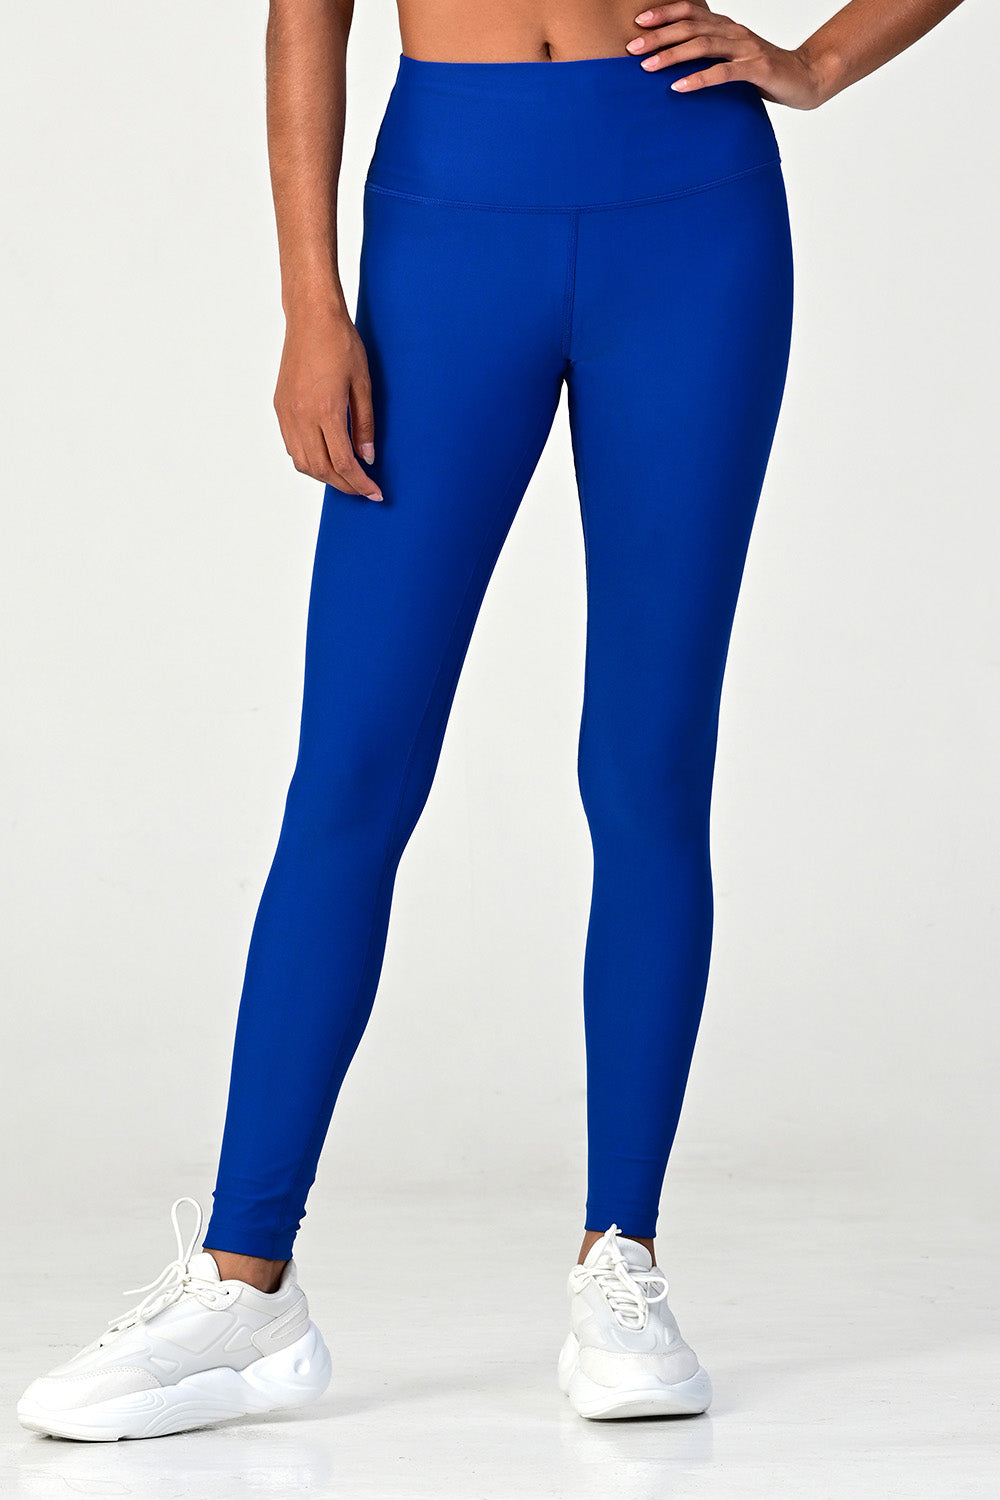 Front view of a woman posing wearing the soho cobalt active legging.